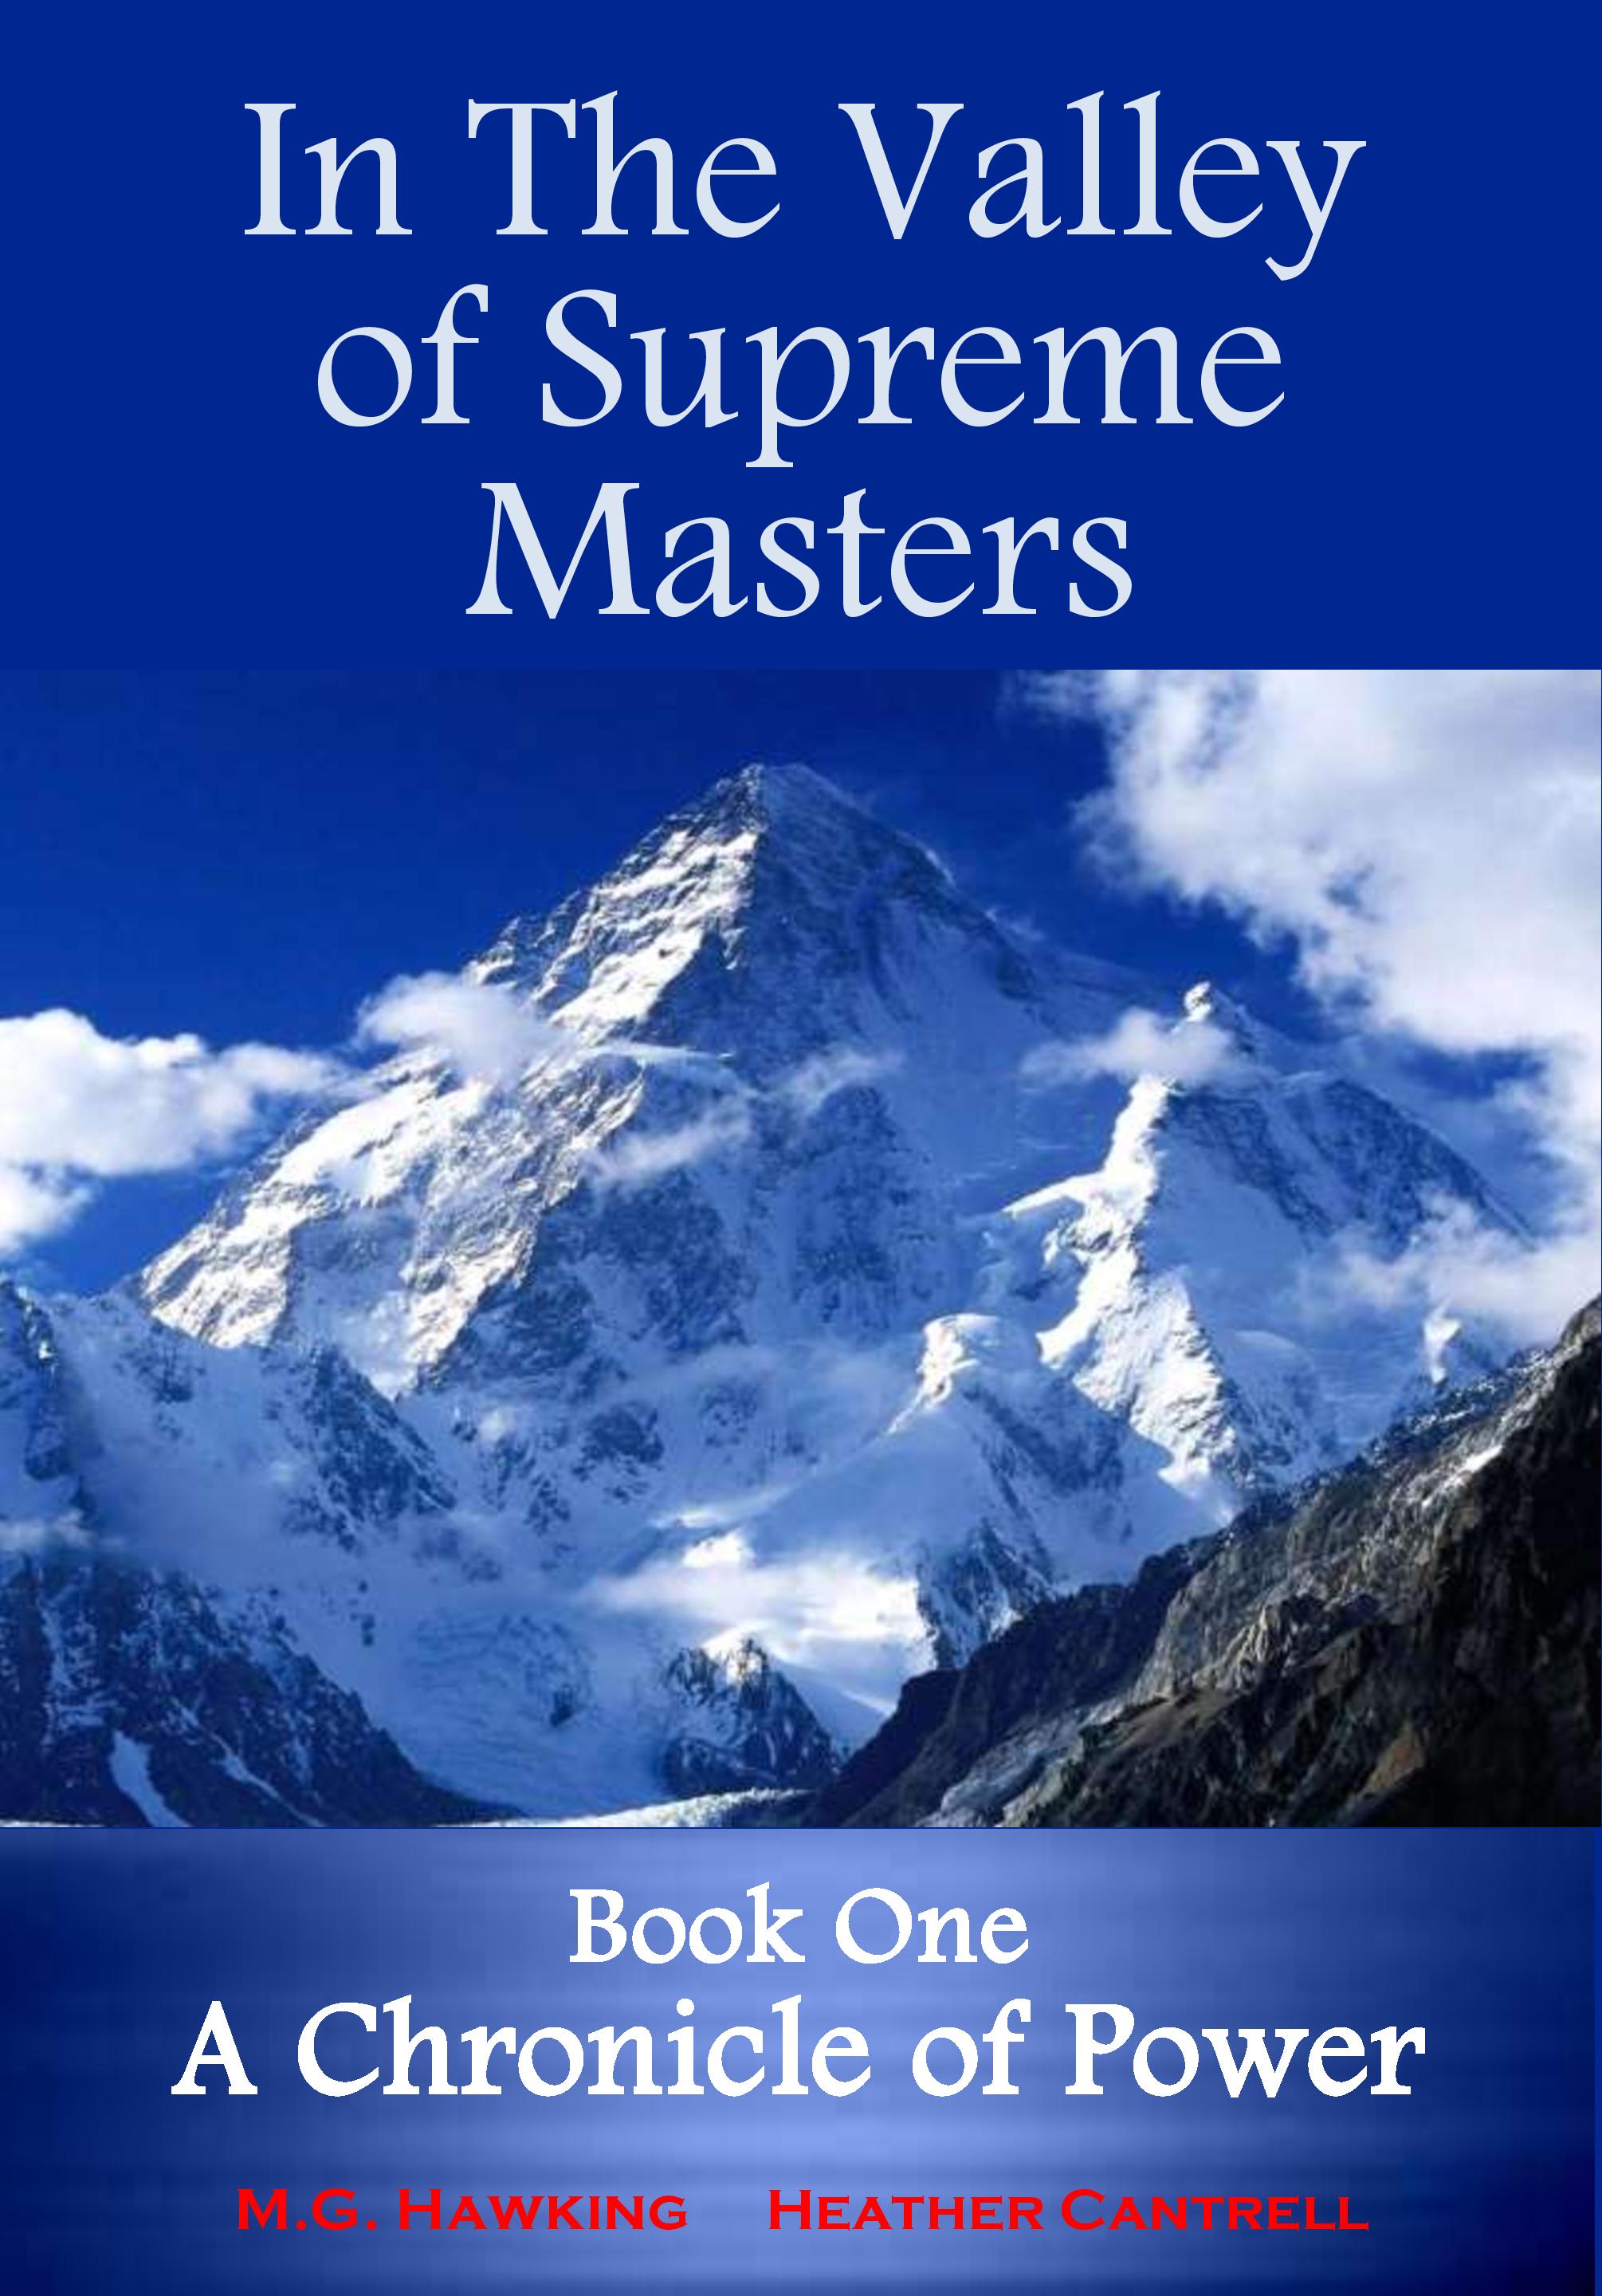 FREE: In The Valley of Supreme Masters, A Chronicle of Power by M.G. Hawking, Heather Cantrell, M.Litt., Jenna Wolfe, Ph.D., Amber Chellings, M.Phil.